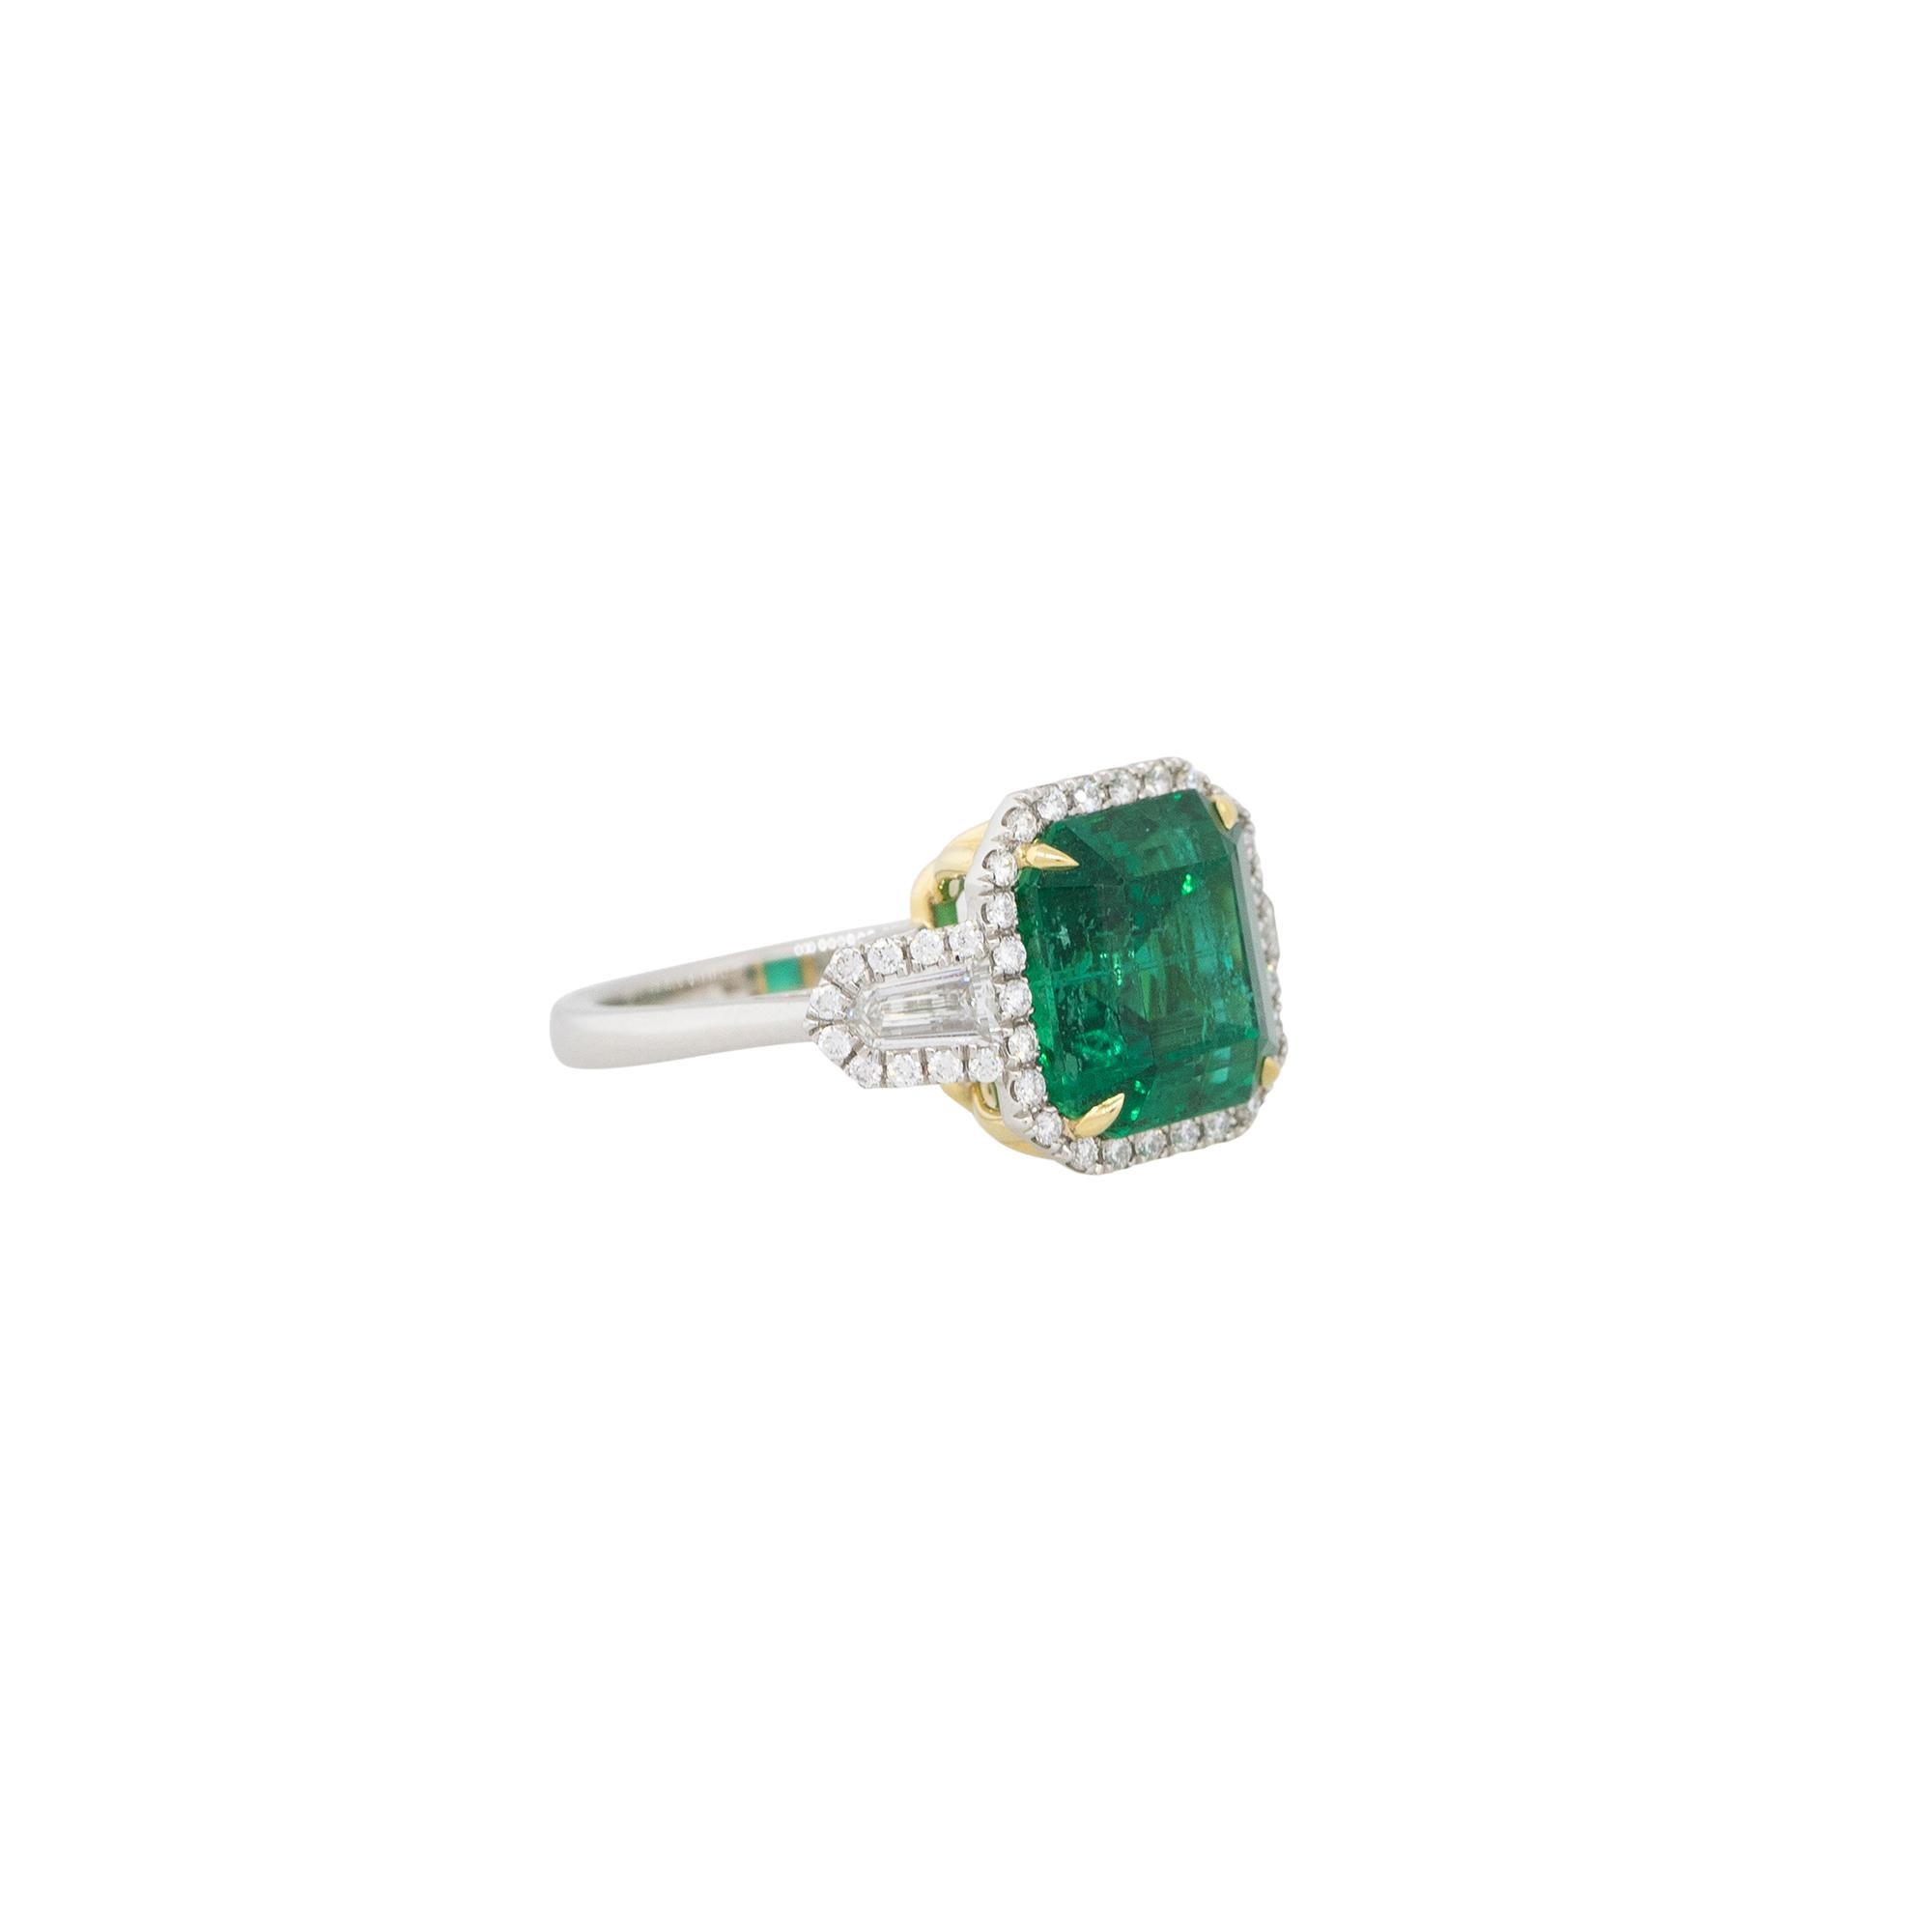 Emerald Cut 6.26 Carat Emerald and Diamond Halo Ring Platinum and 18 Karat In Stock For Sale